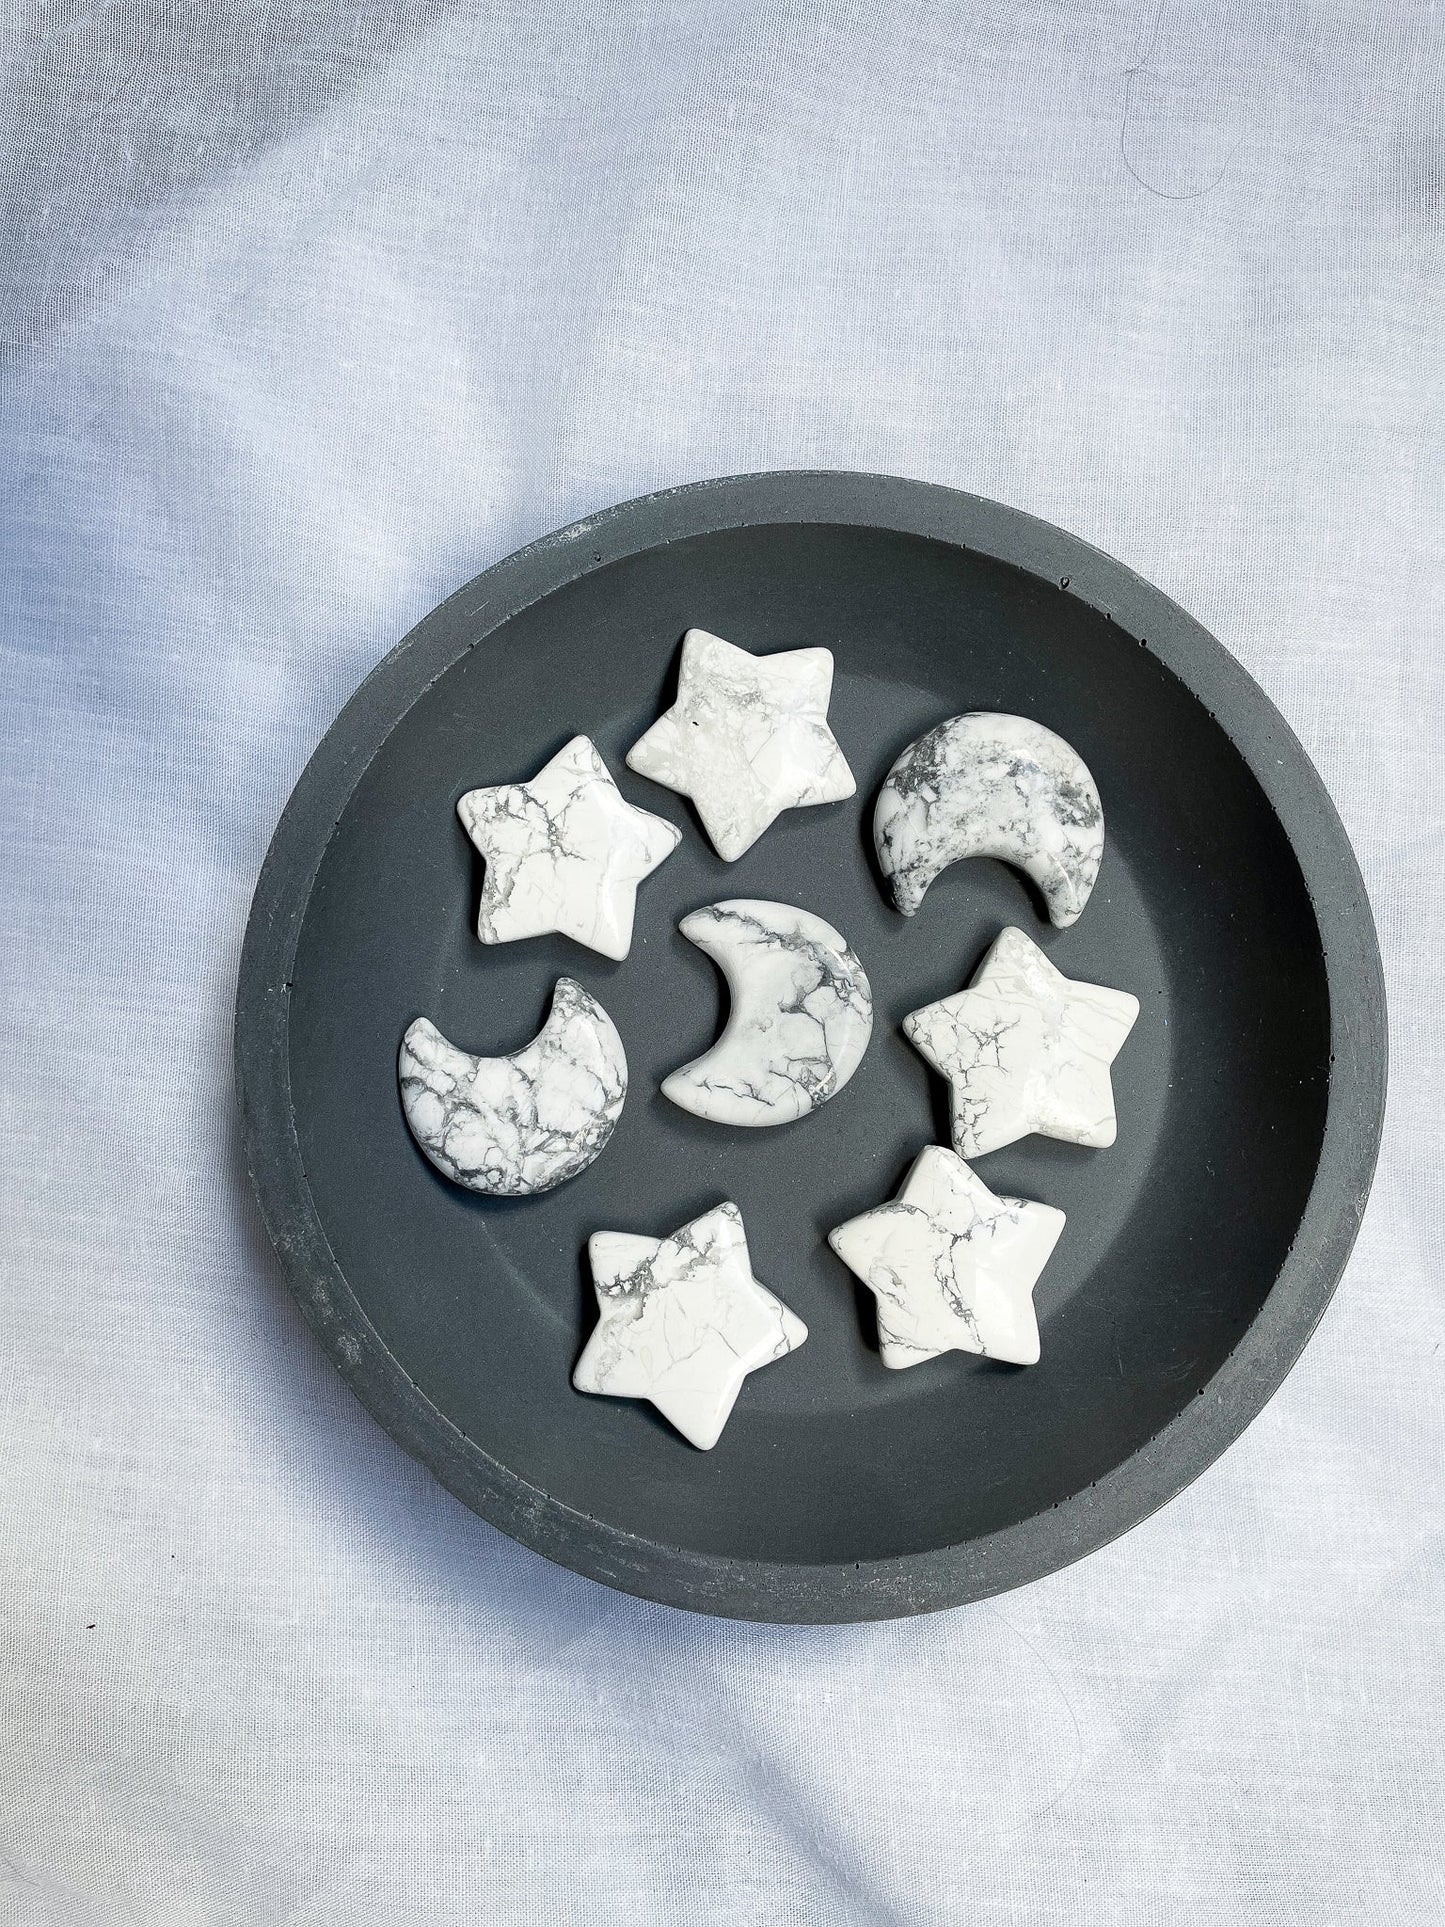 A photo of howlite moon and star carvings resting in a dark grey dish, with a light grey background. The moon and star carvings are made from howlite, a mineral that is typically white or grey with grey, black, or brown veins or markings.